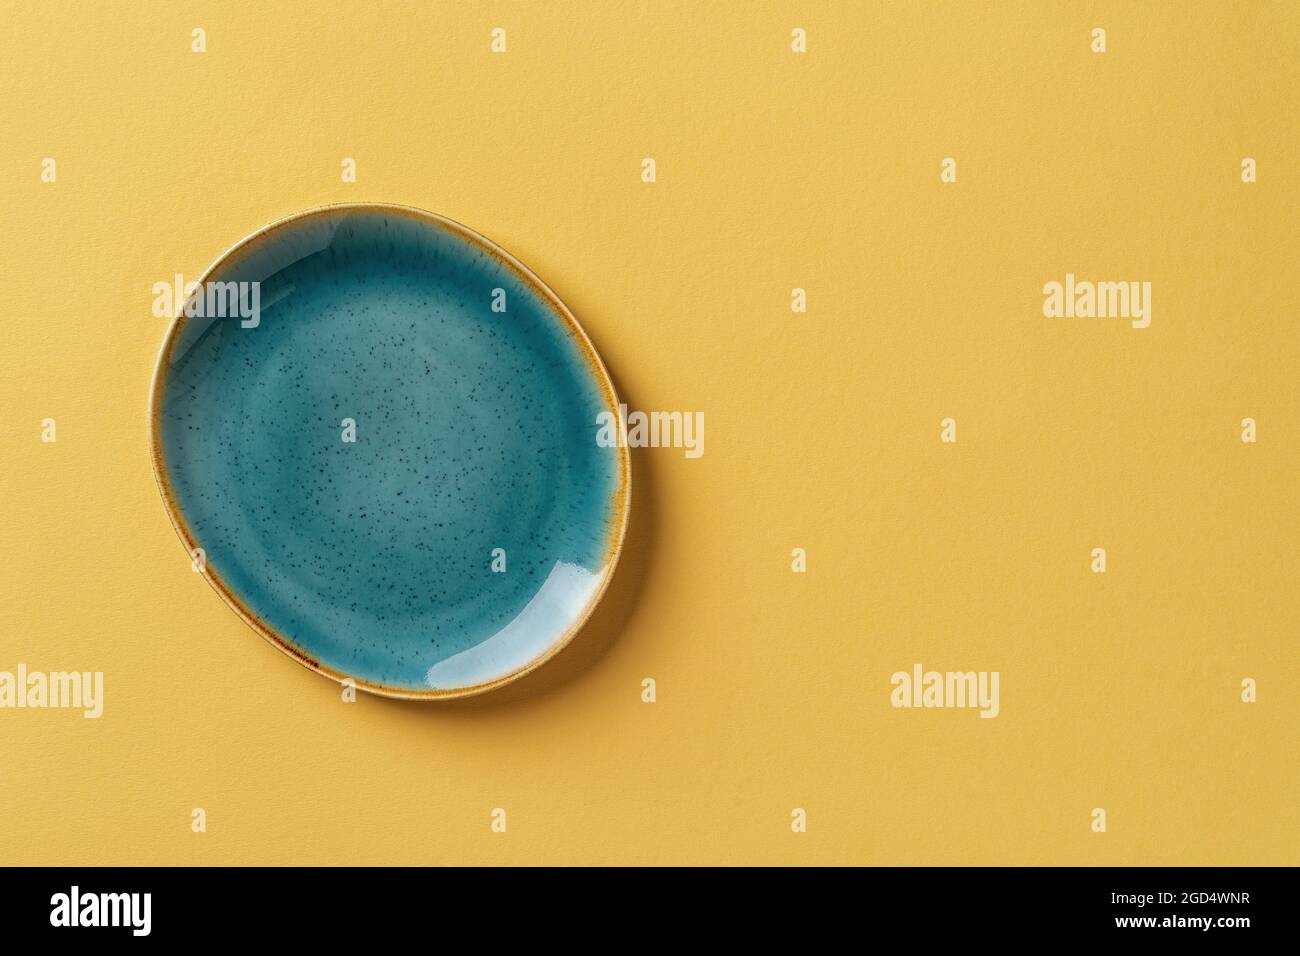 Turquoise teal oval ceramic plate over textured yellow background. Modern trendy colored crockery and tableware for stylish food design. Empty dishes. Stock Photo